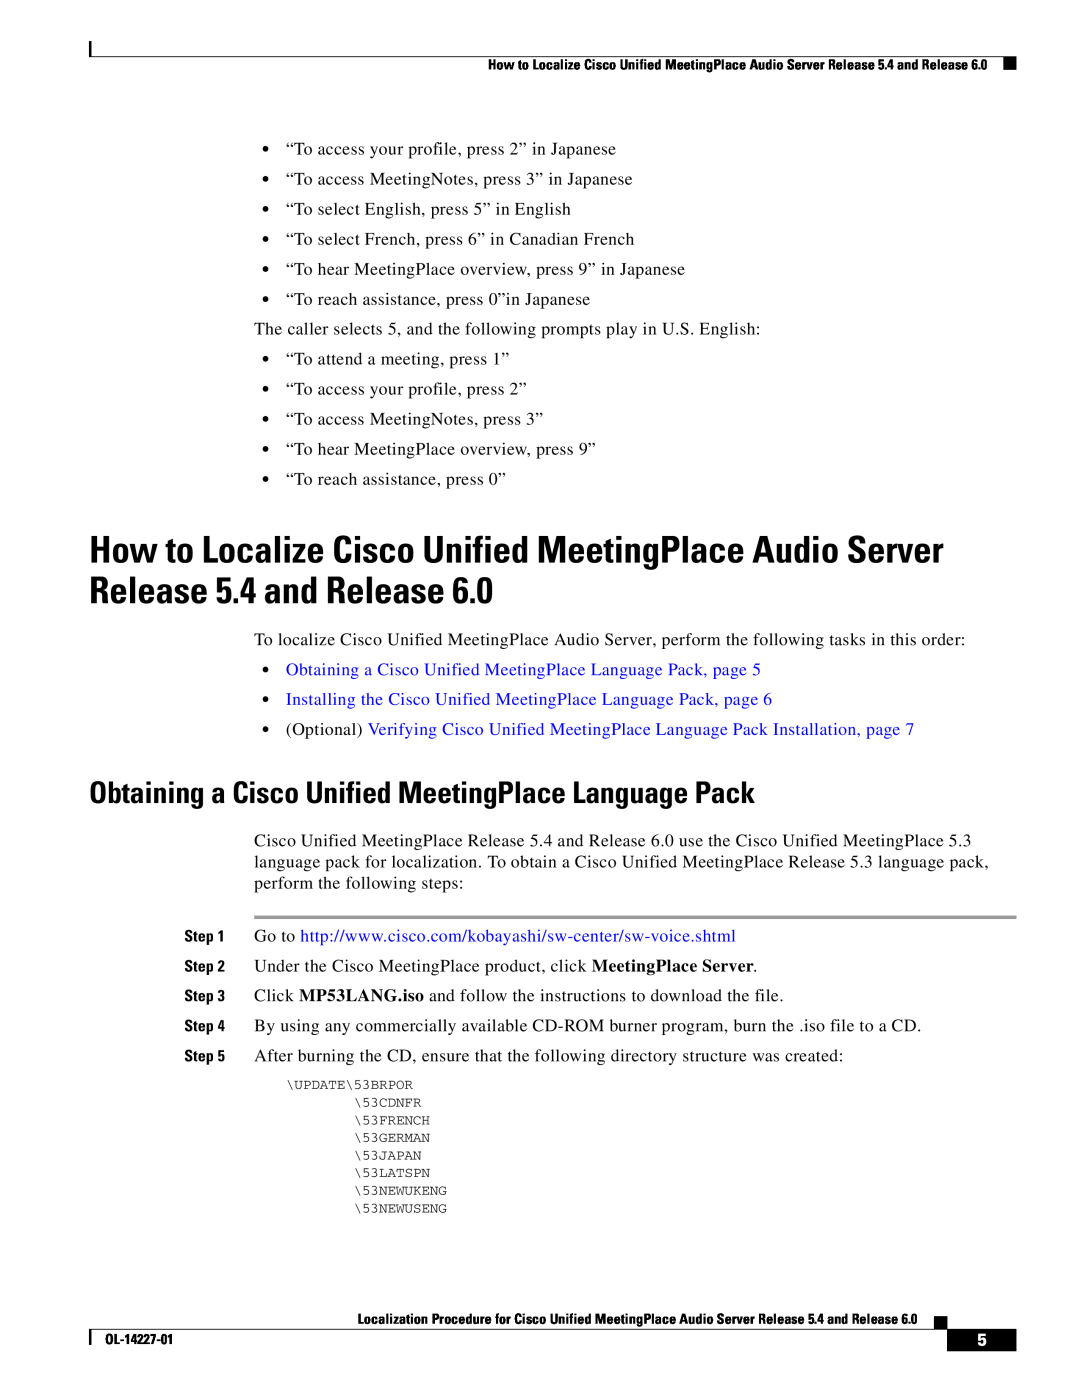 Cisco Systems 6, 5.4 manual Obtaining a Cisco Unified MeetingPlace Language Pack 